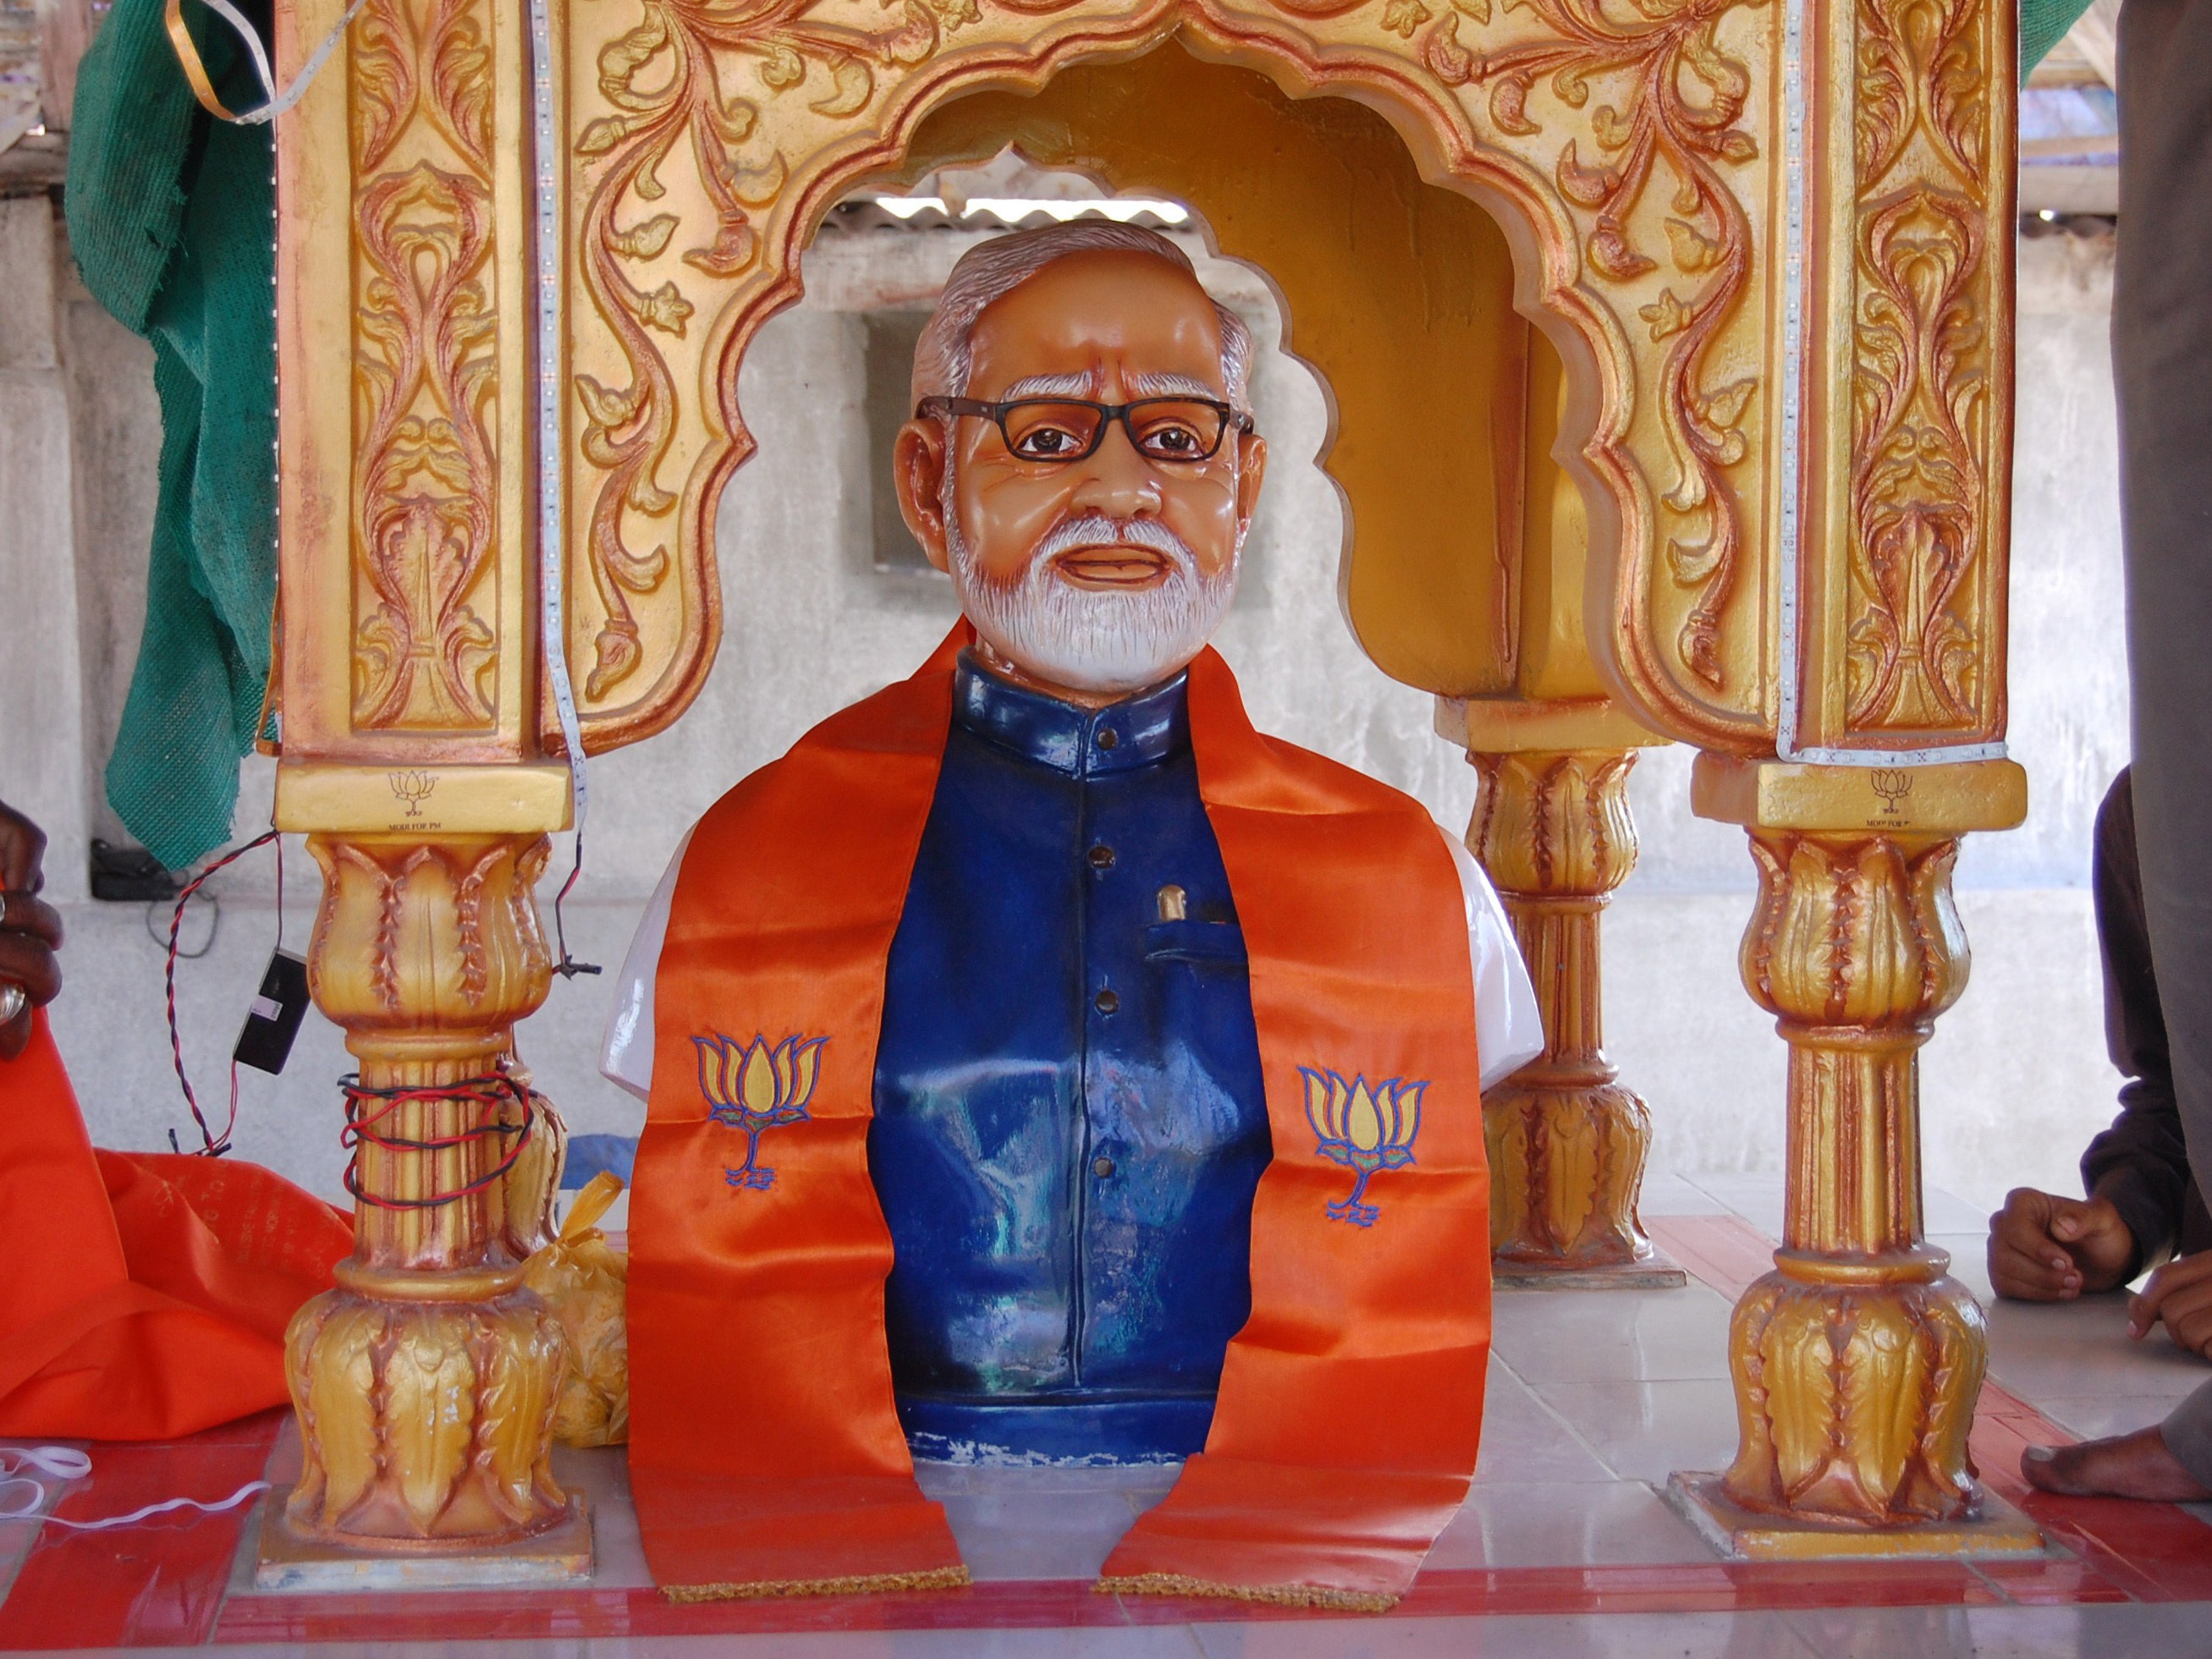 Modi was 'appalled' by the statue built to deify him